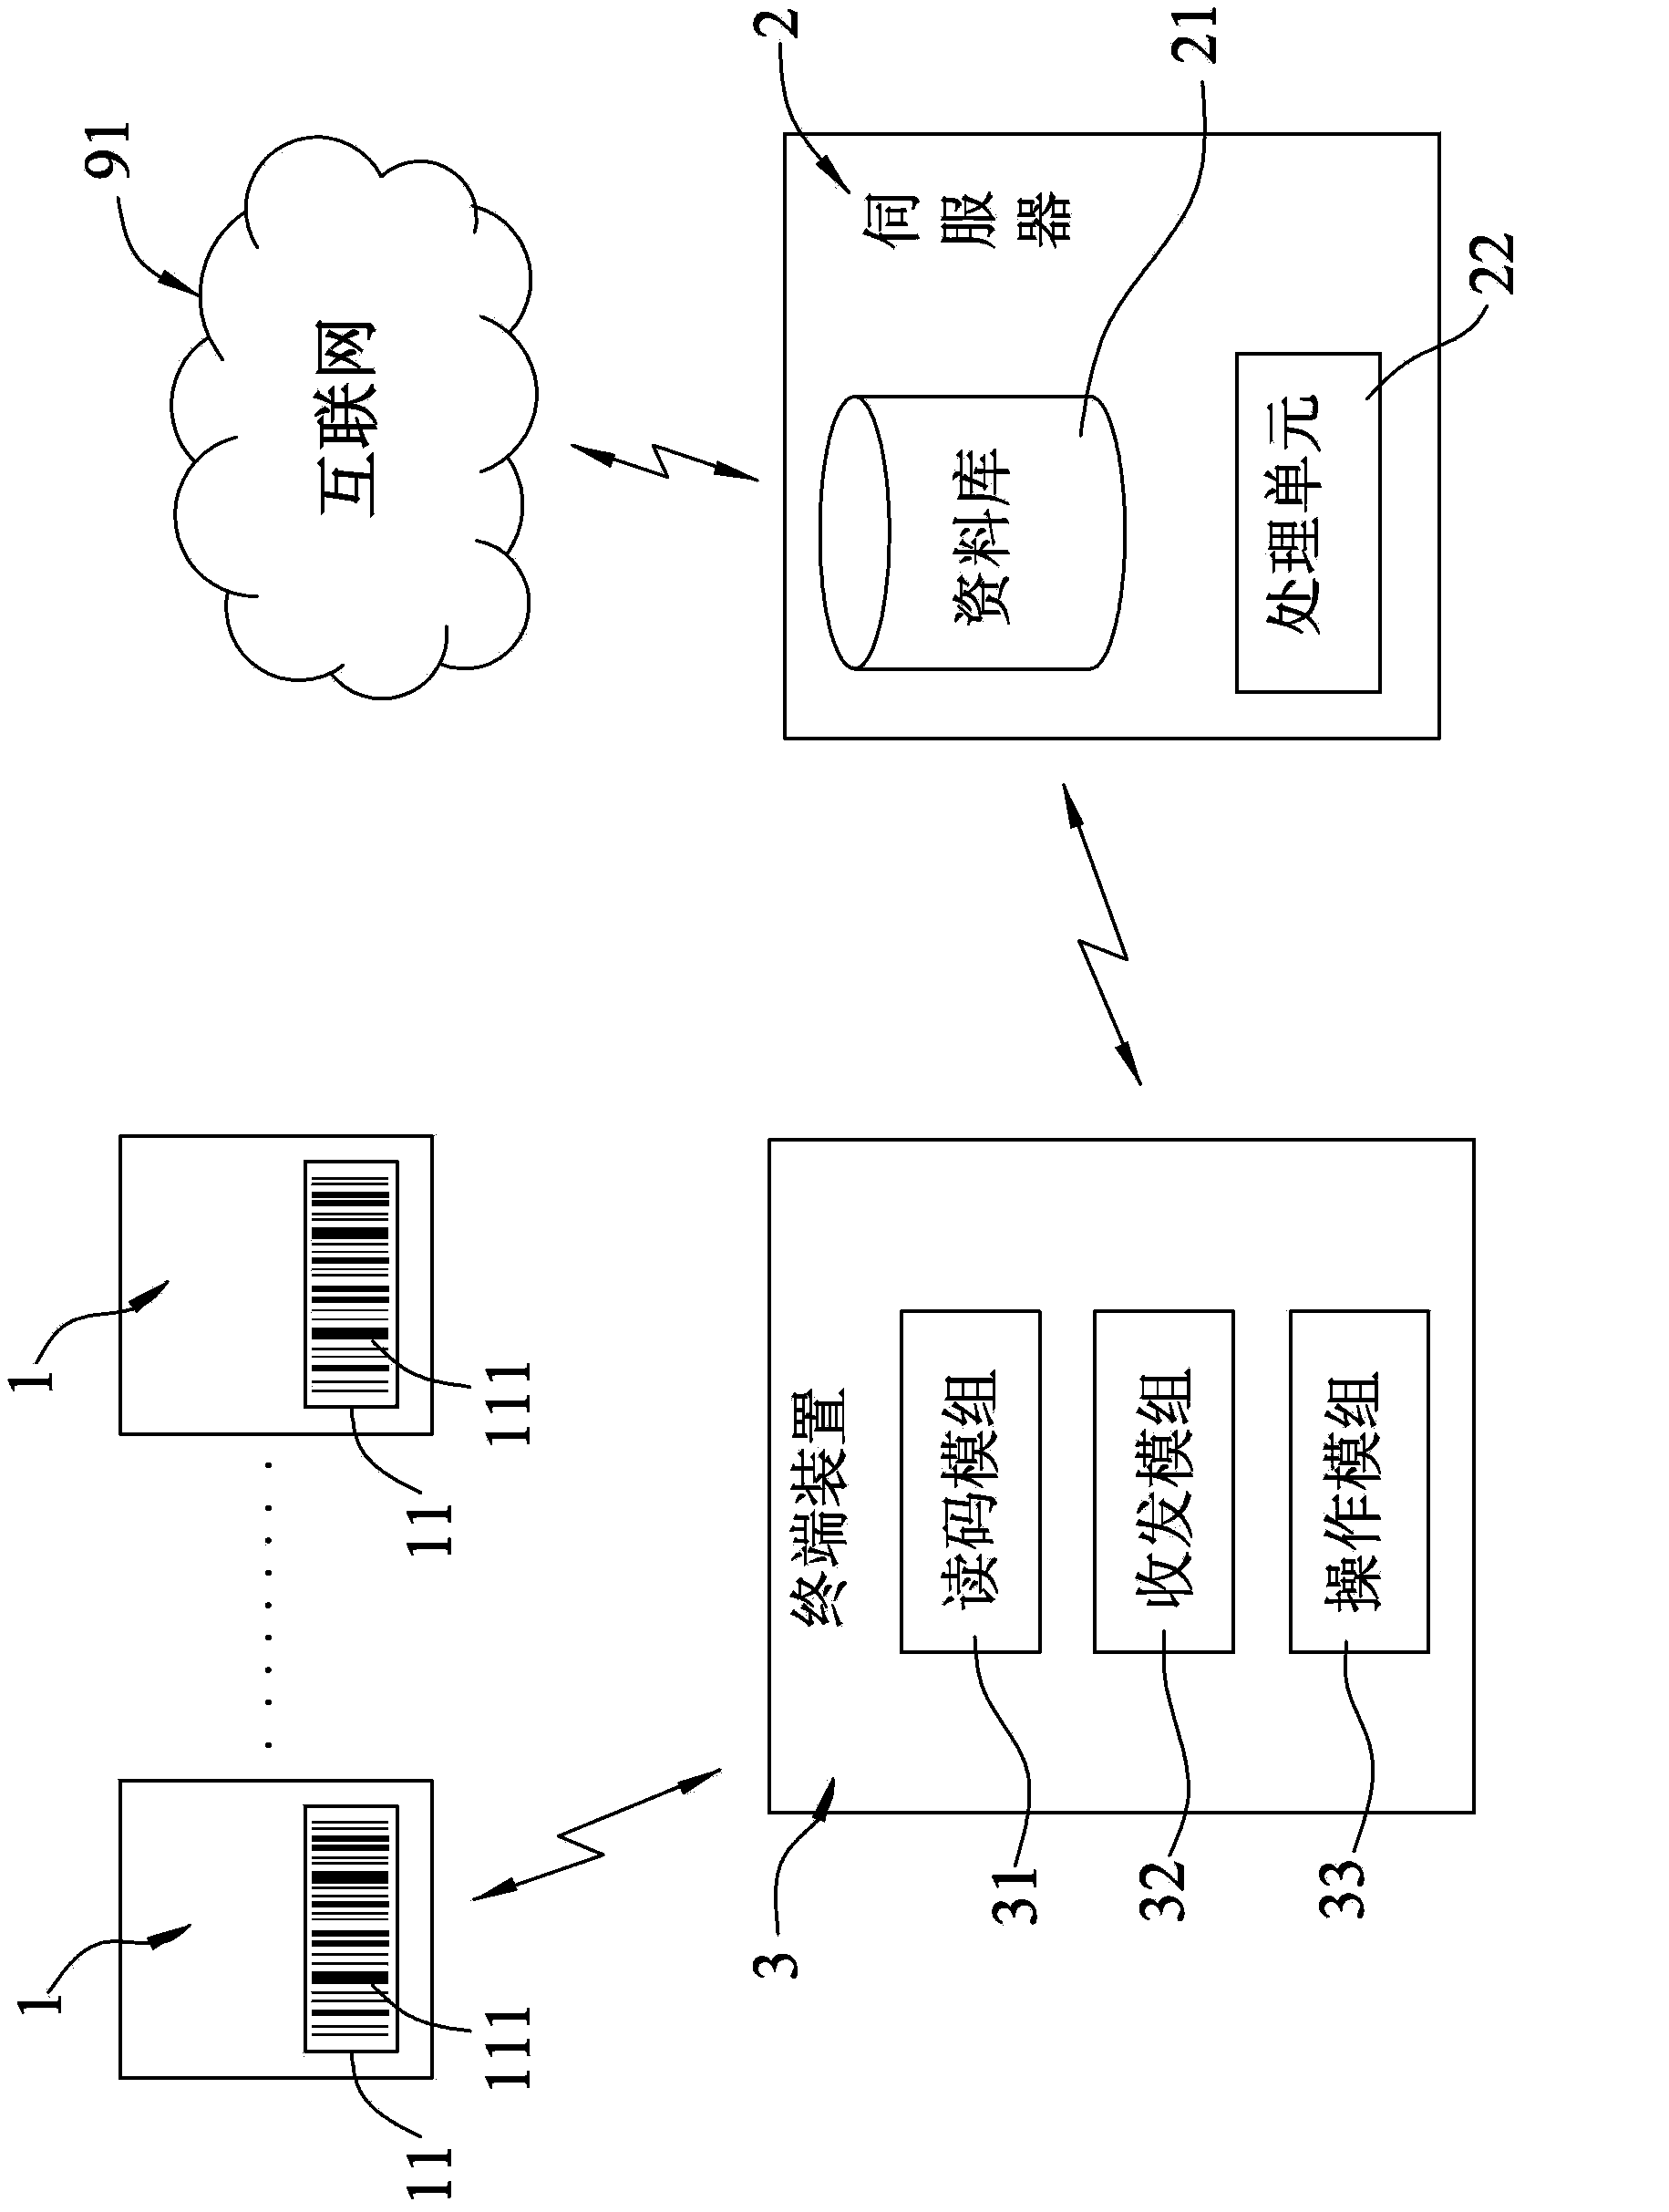 Plant inspection method and system